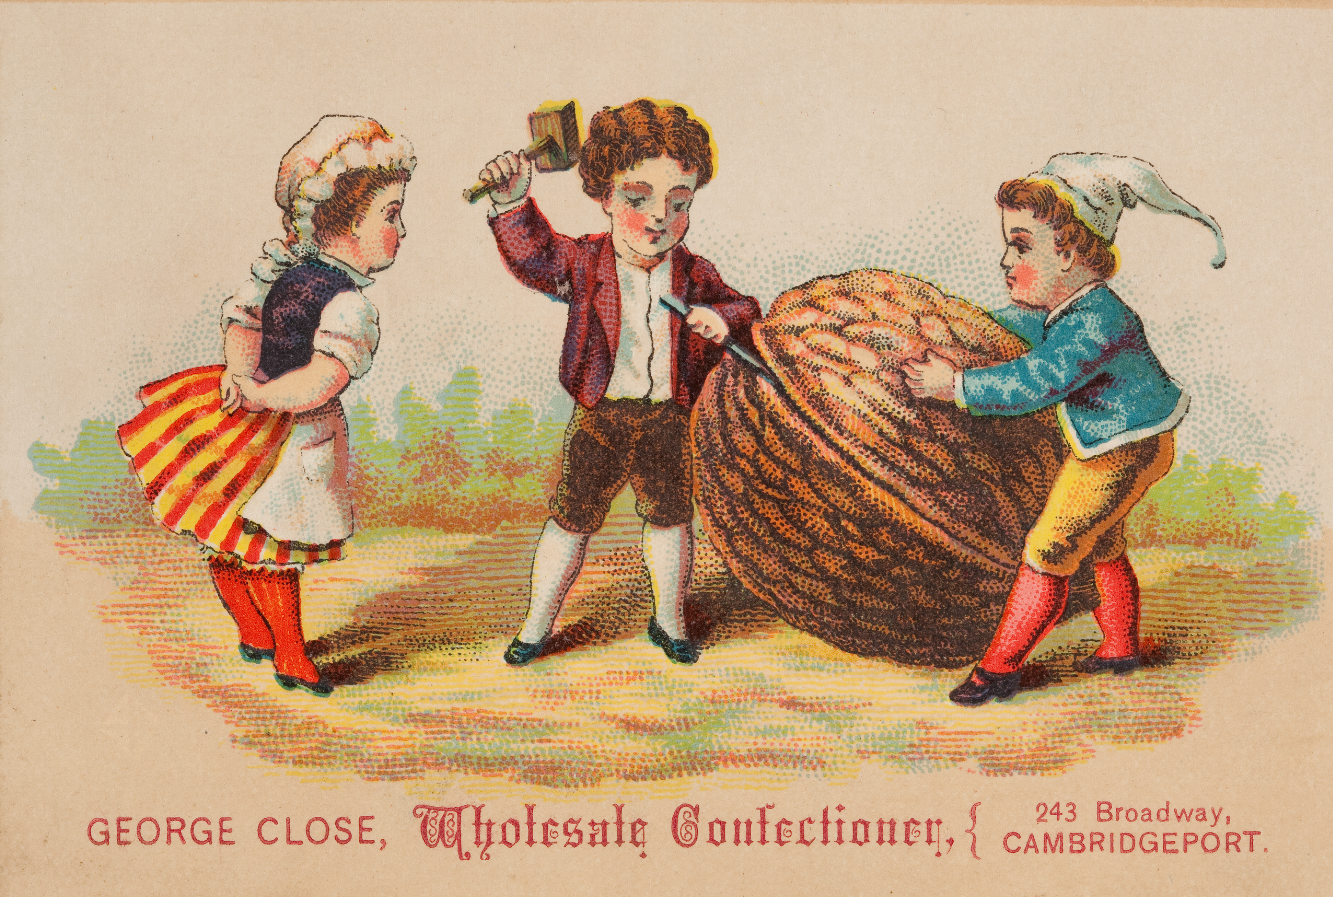 These cherubic children work together to get at this walnut on a trade card for Close. This design was not unique: at least one other late 19th century confectioner used the same image on his advertising cards.